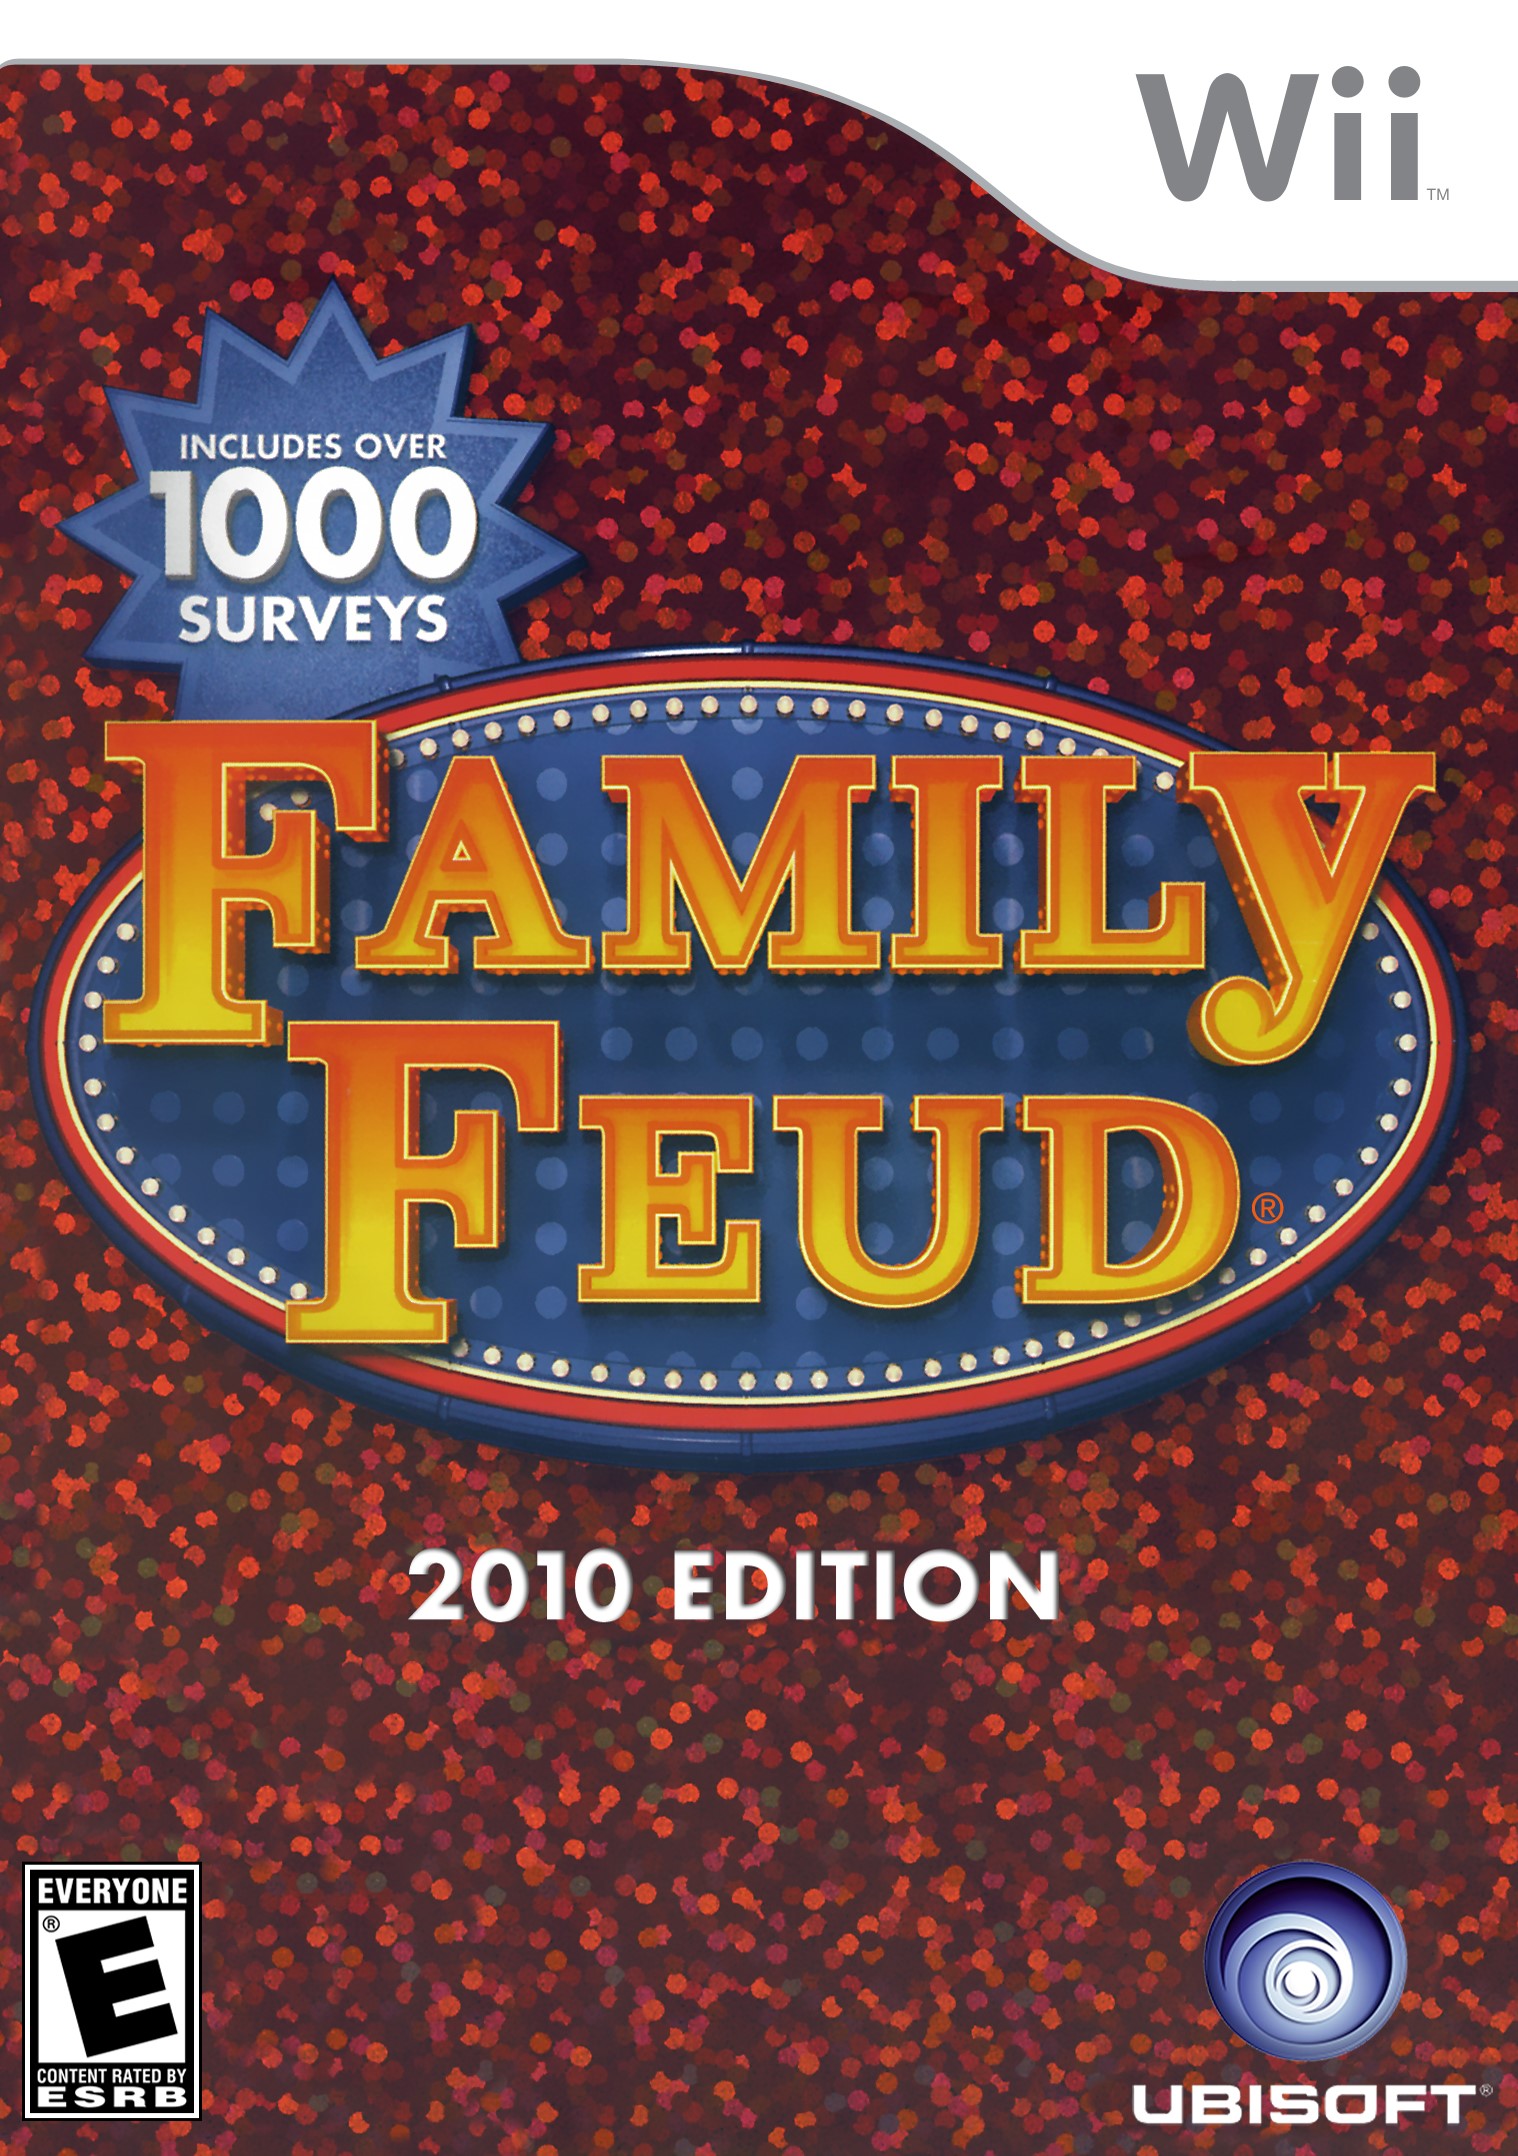 'Family Feud: 2010 Edition'